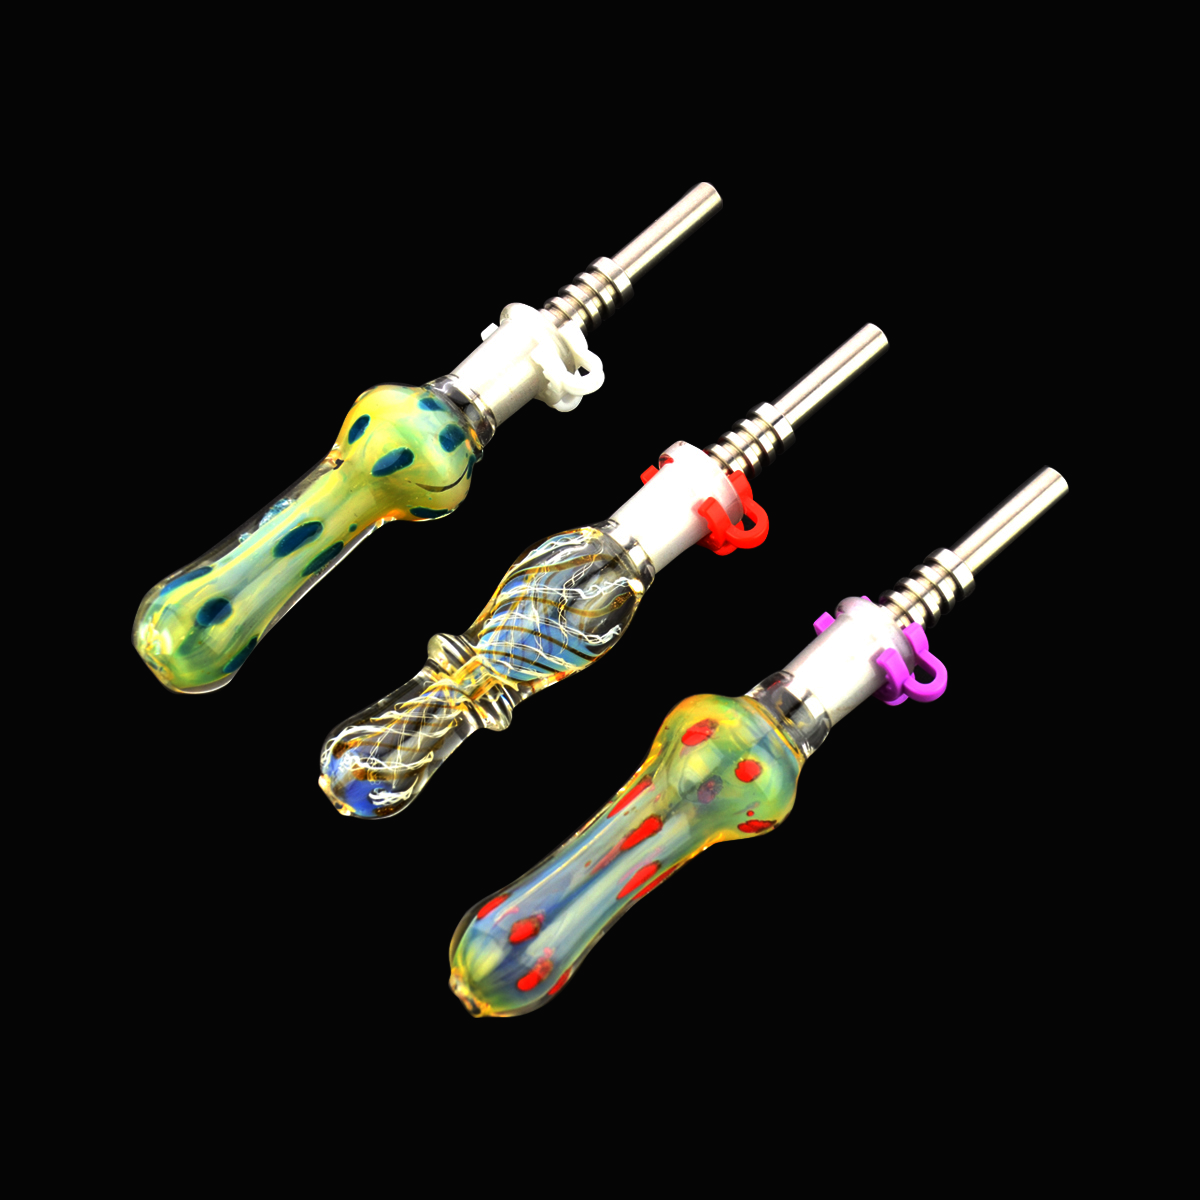 6'' Dot Glass Art Nectar Collector Concentrate Straw with 14mm Plastic Clip and Titanium NAIL